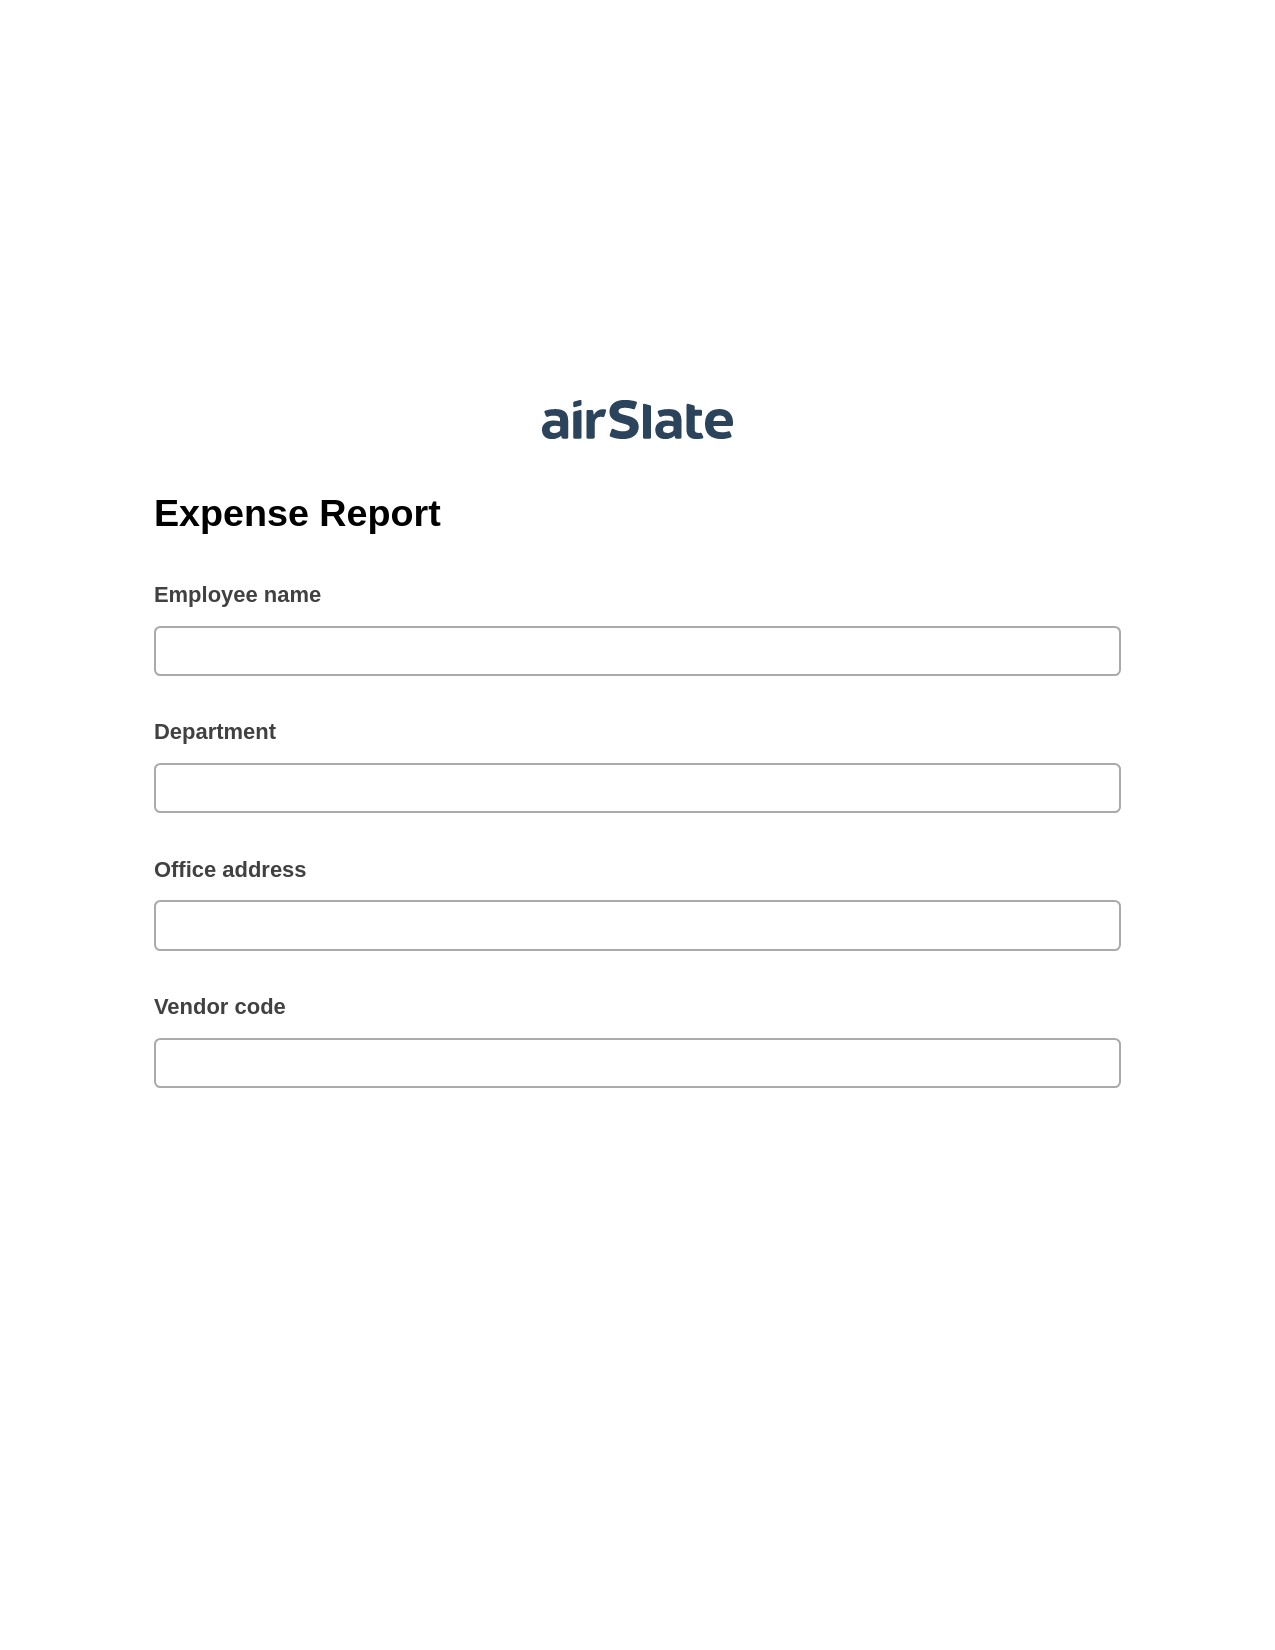 Expense Report System Bot - Slack Two-Way Binding Bot, Mailchimp add recipient to audience Bot, Export to Salesforce Bot